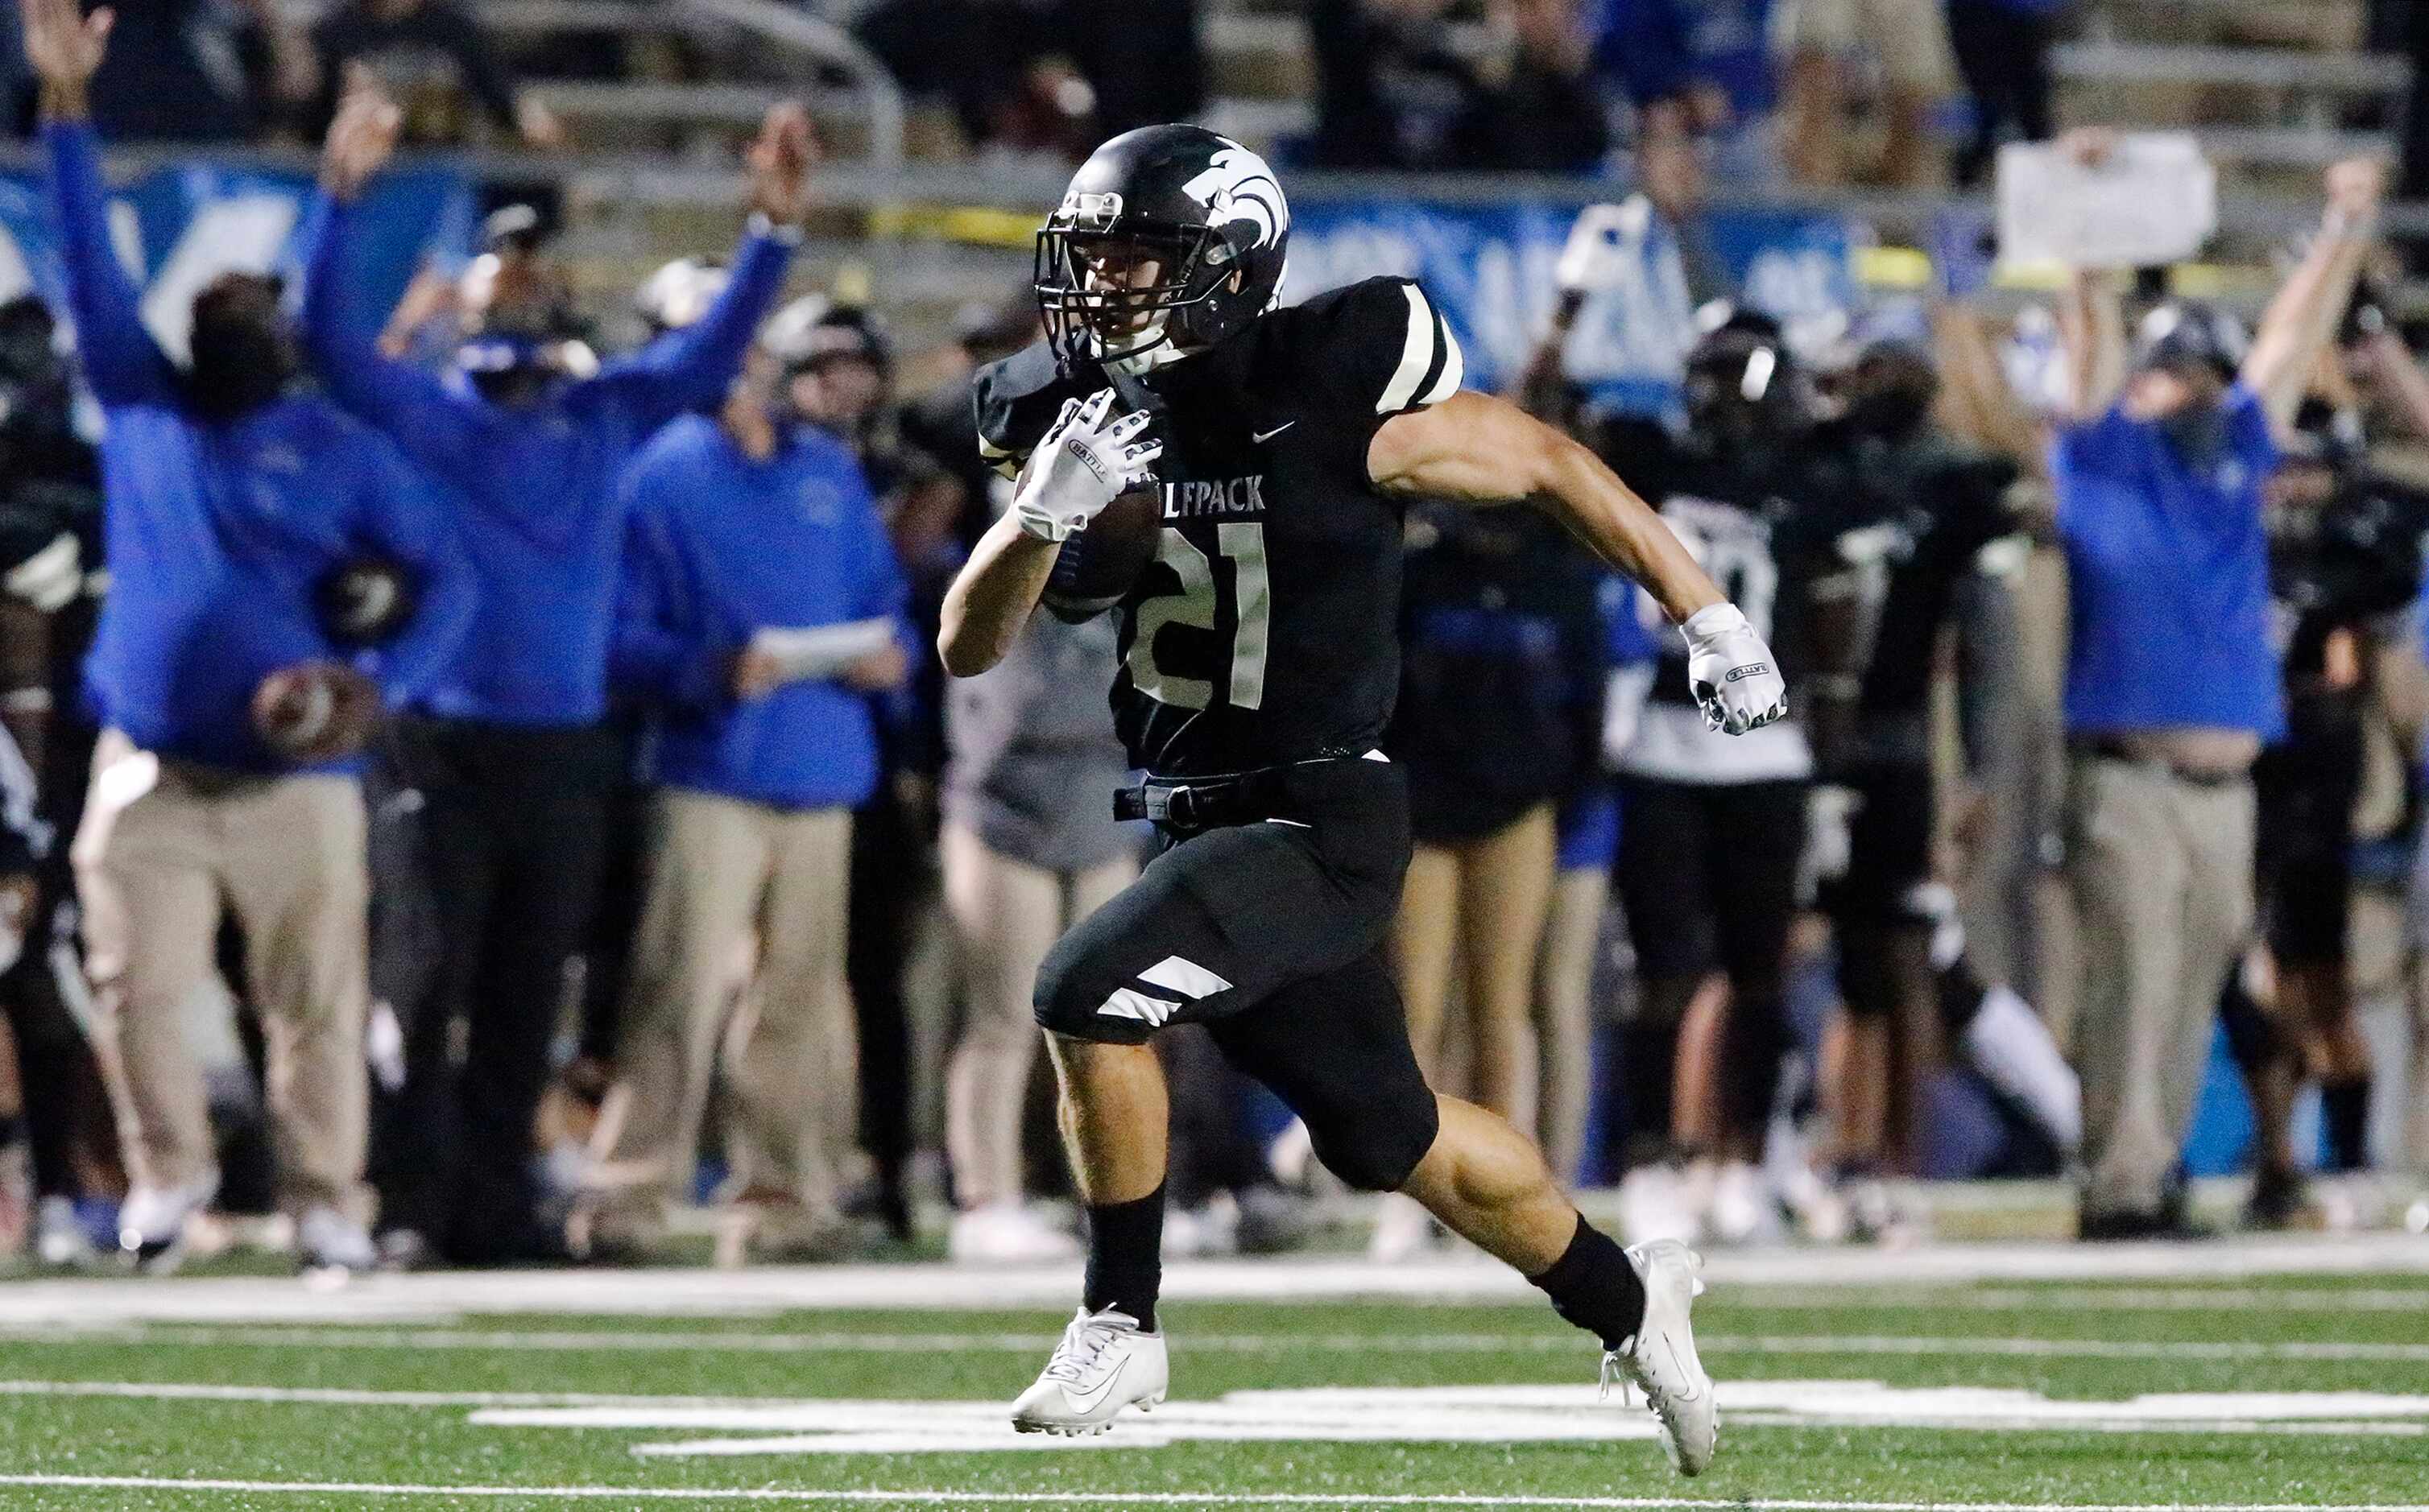 Plano West High School running back Dermot White (21) sprints to the end zone for the first...